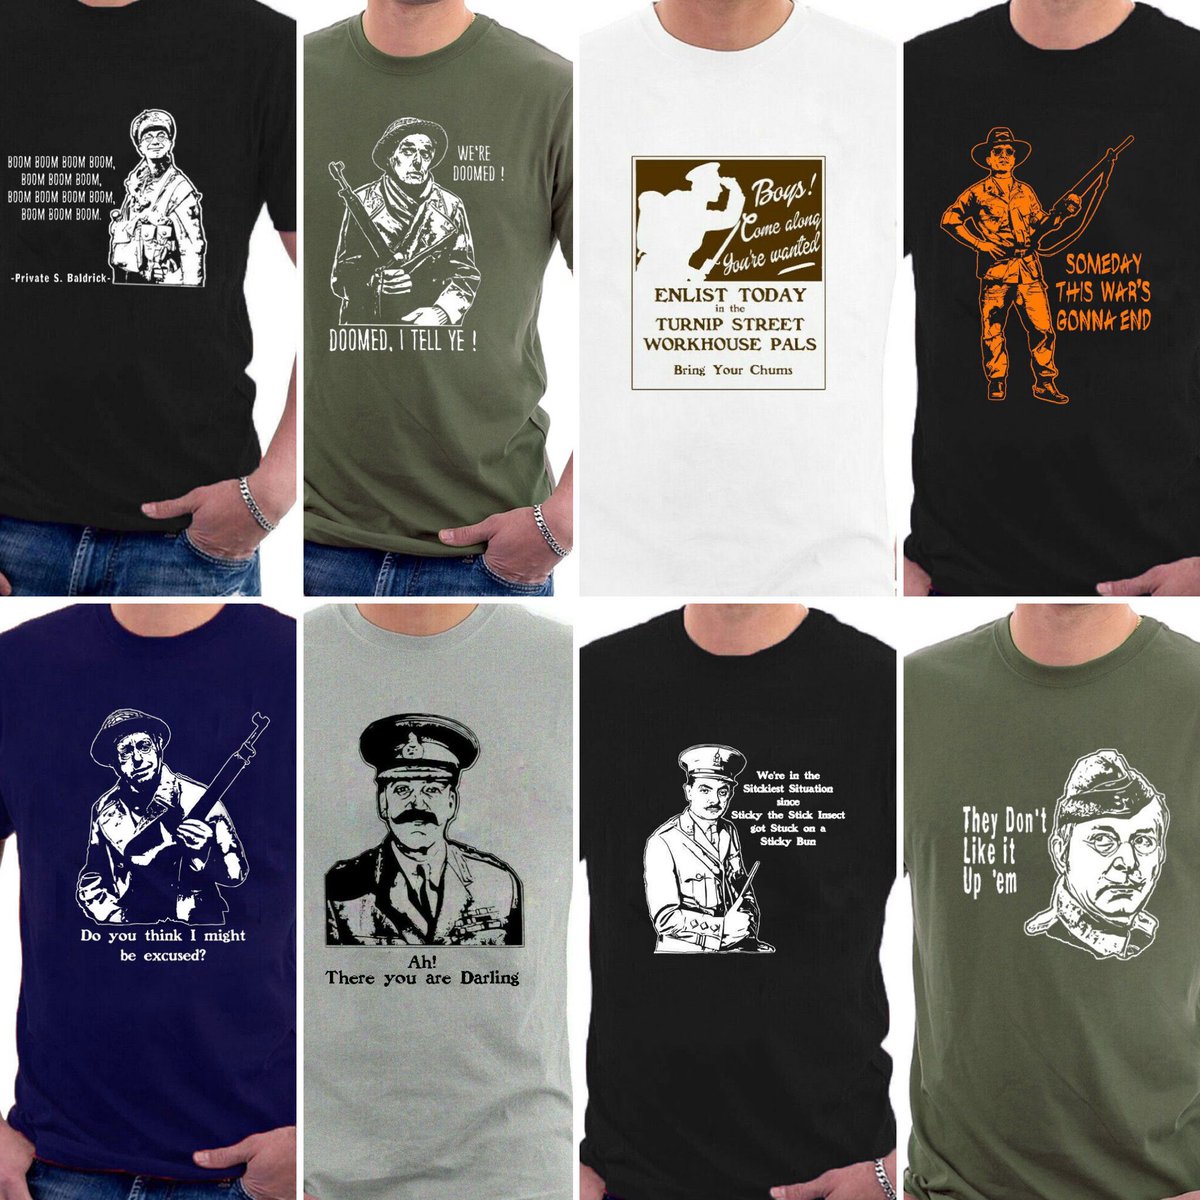 We’re calling up the reserves. Putin and the Iranians will be shitting themselves. #DadsArmy #Blackadder #Zulu #ApocalypseNow #ItAintHalfHotMum #CarryOnUptheKhyber @EatKnuckleFritz @sincesixaneagle @daveainsworth63 @Johnnypapa64 Tees by Sillytees.co.uk